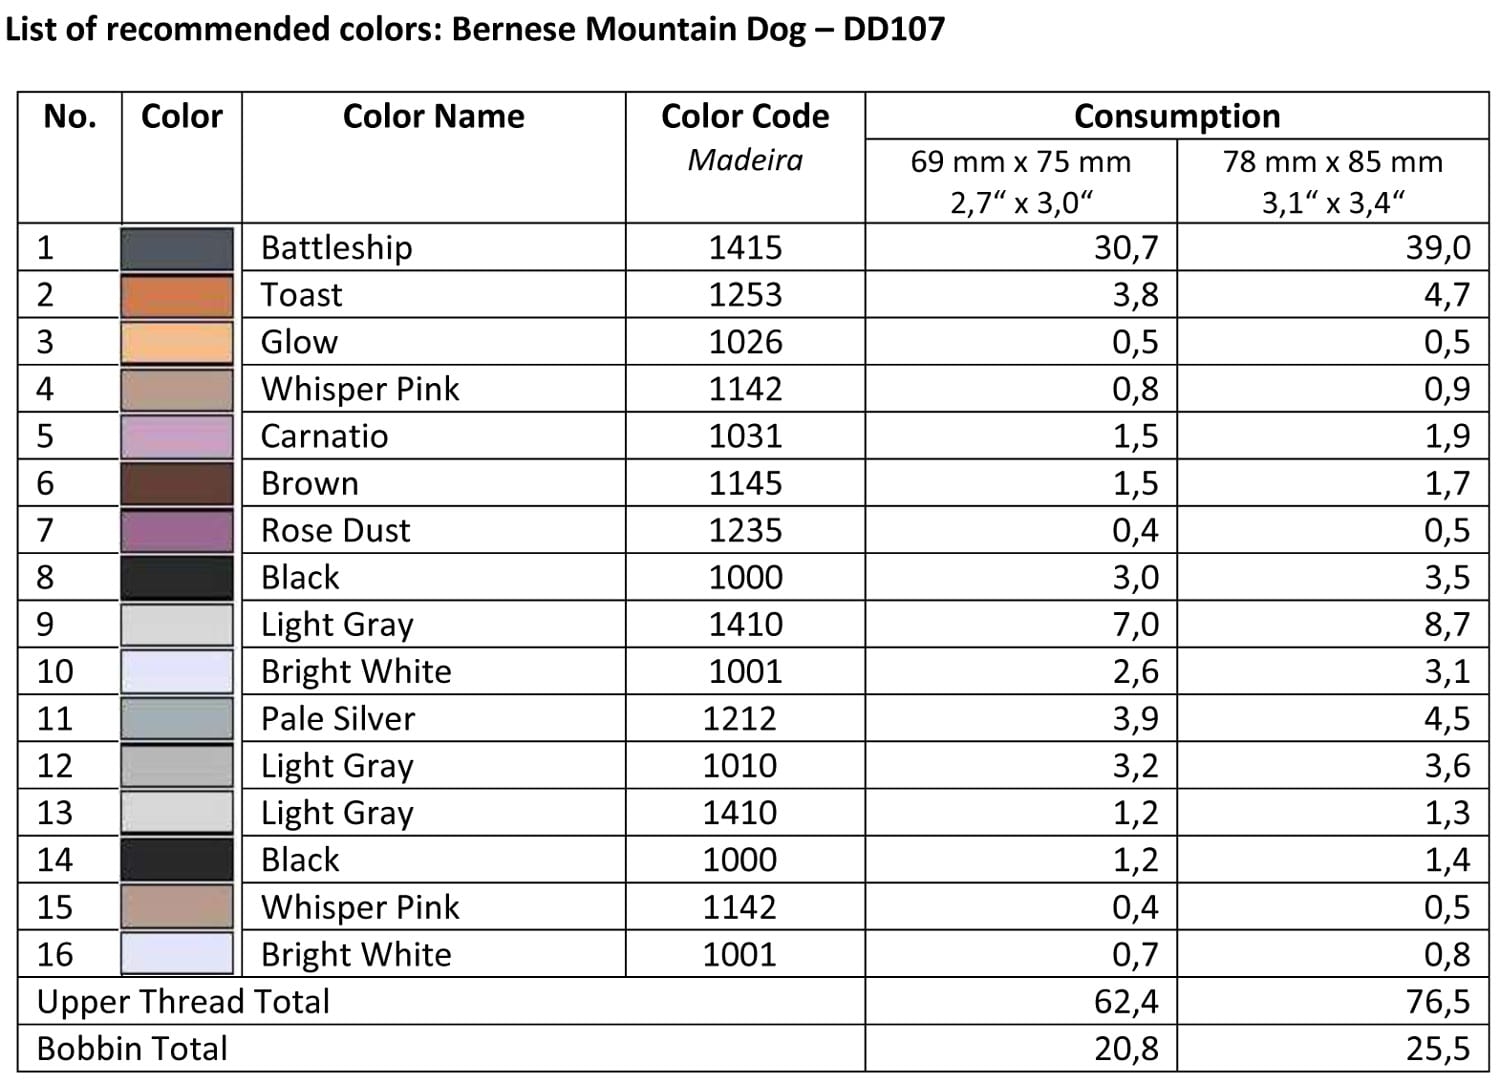 List of Recommended Colors - Bernese Mountain Dog DD107